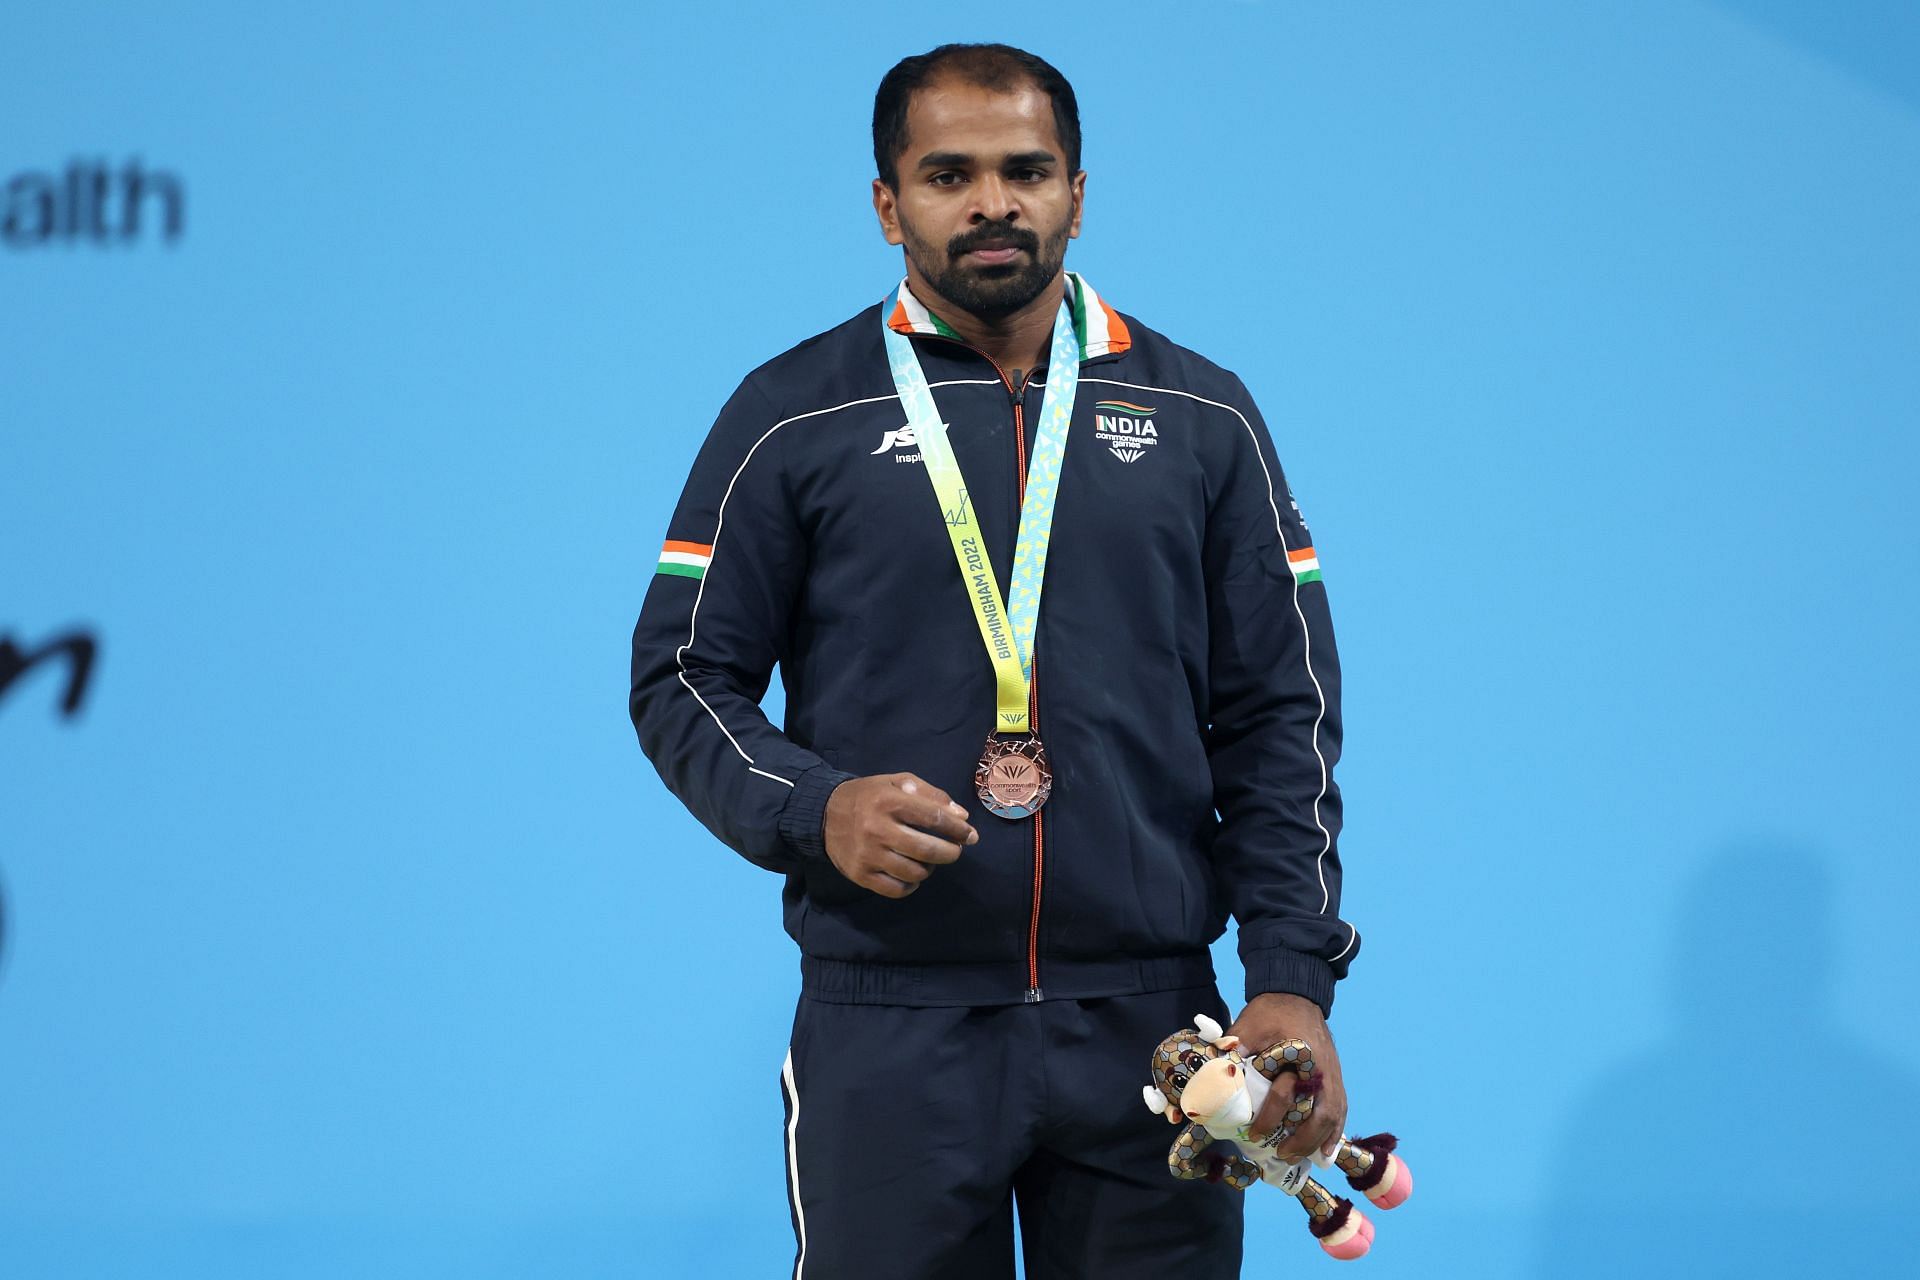 Indian weightlifter Gururaja Poojary with his CWG bronze medal. (PC: Getty Images)